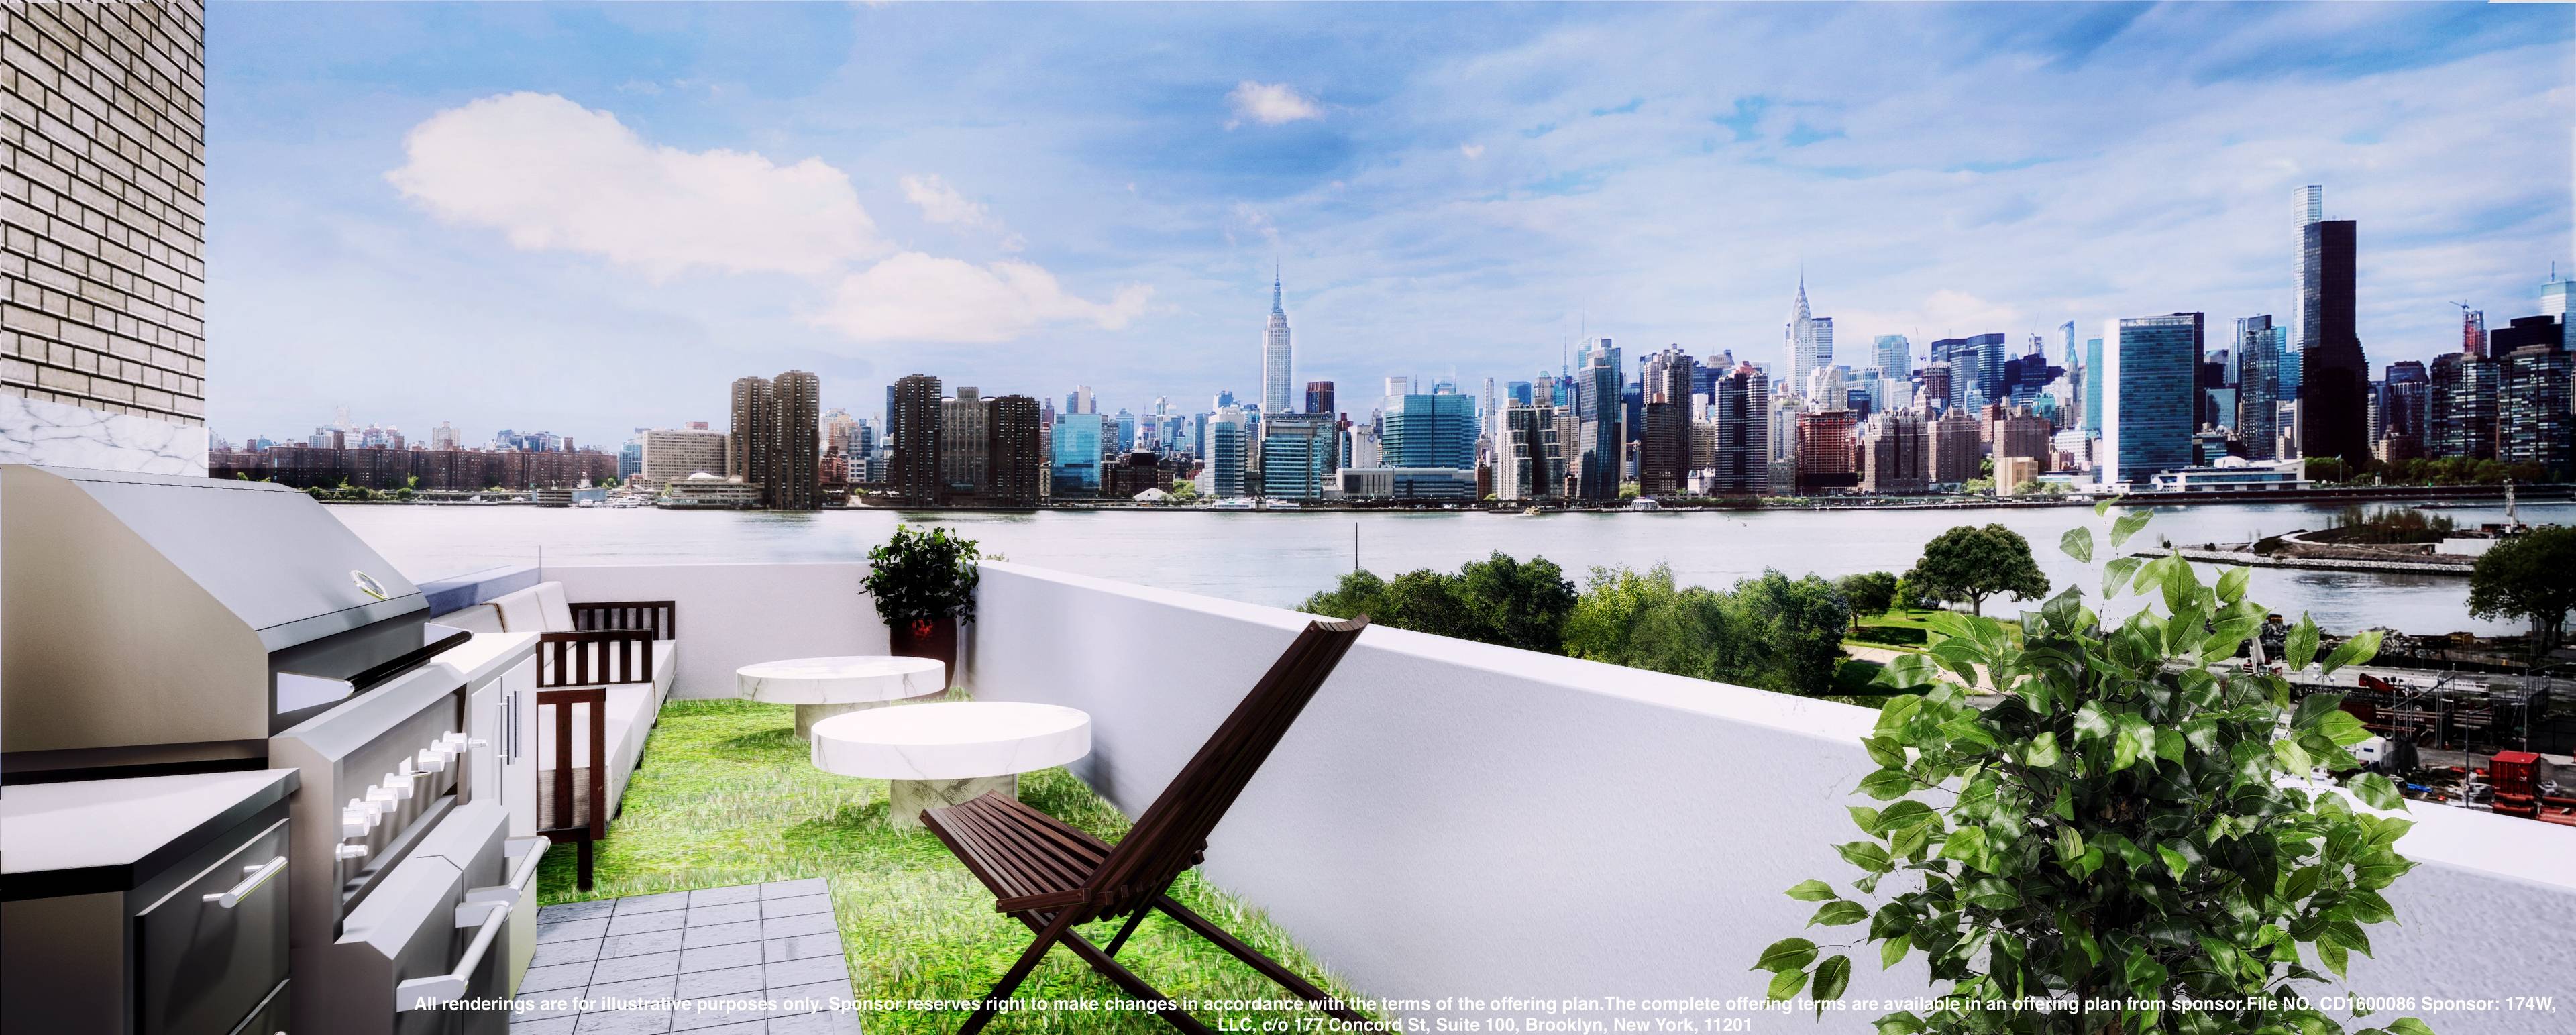 Two Bedroom, Two Bath Penthouse Duplex with Terrace in Greenpoint